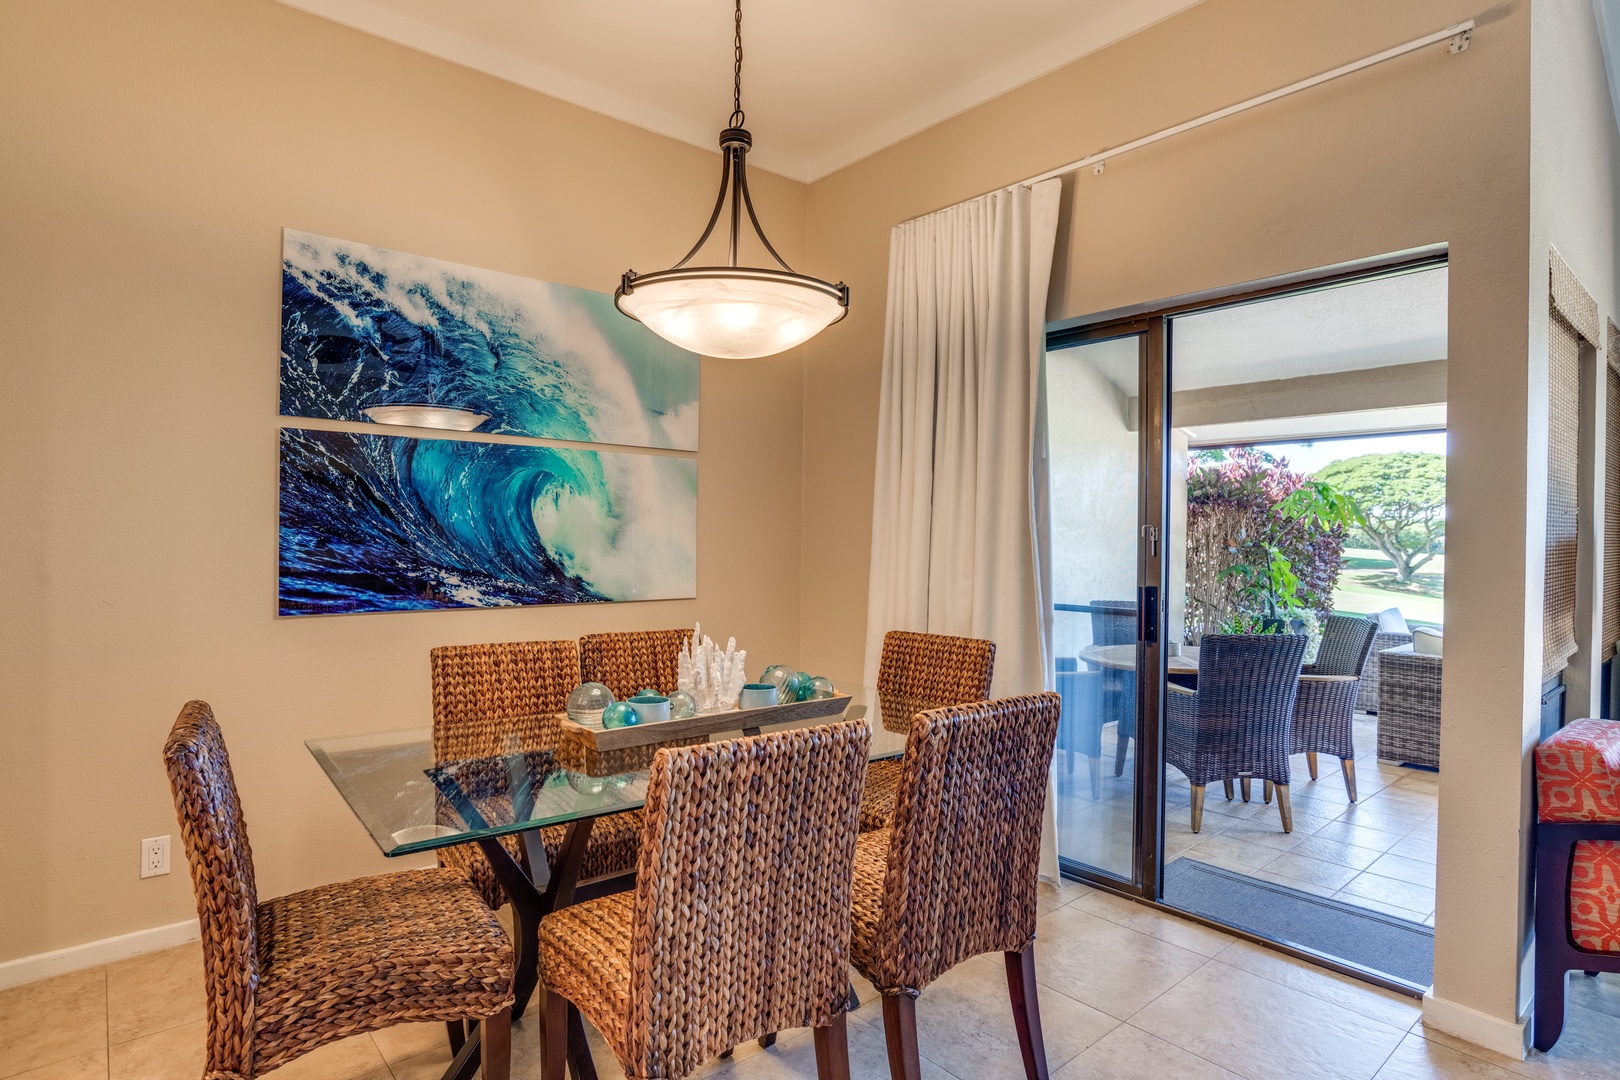 Lahaina Vacation Rentals, Kapalua Golf Villas 15P3-4 - Dine in a vibrant setting accented by ocean-inspired art, where the glass table reflects the joy of shared meals and stories.